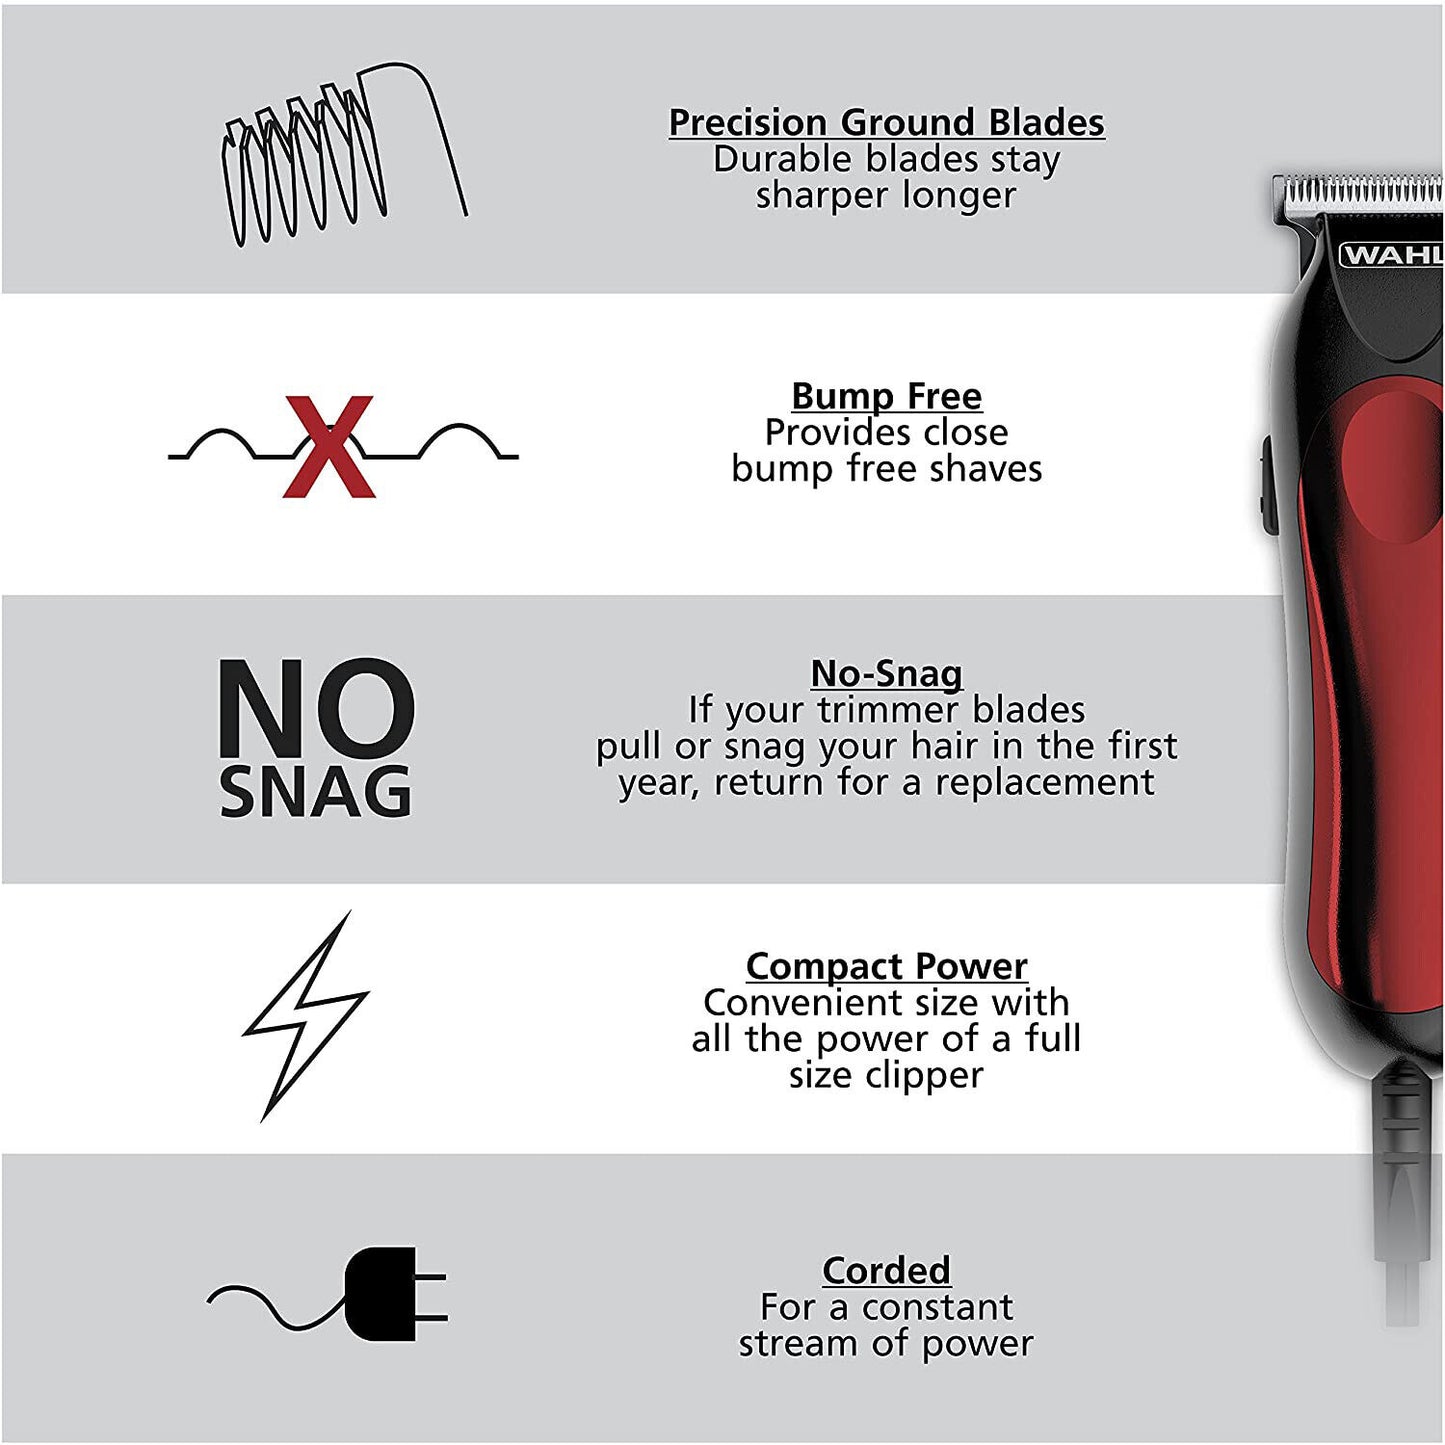 Wahl Hair Clippers Beard Mustache Professional Trimmer Barber Shaver T-Pro Liner